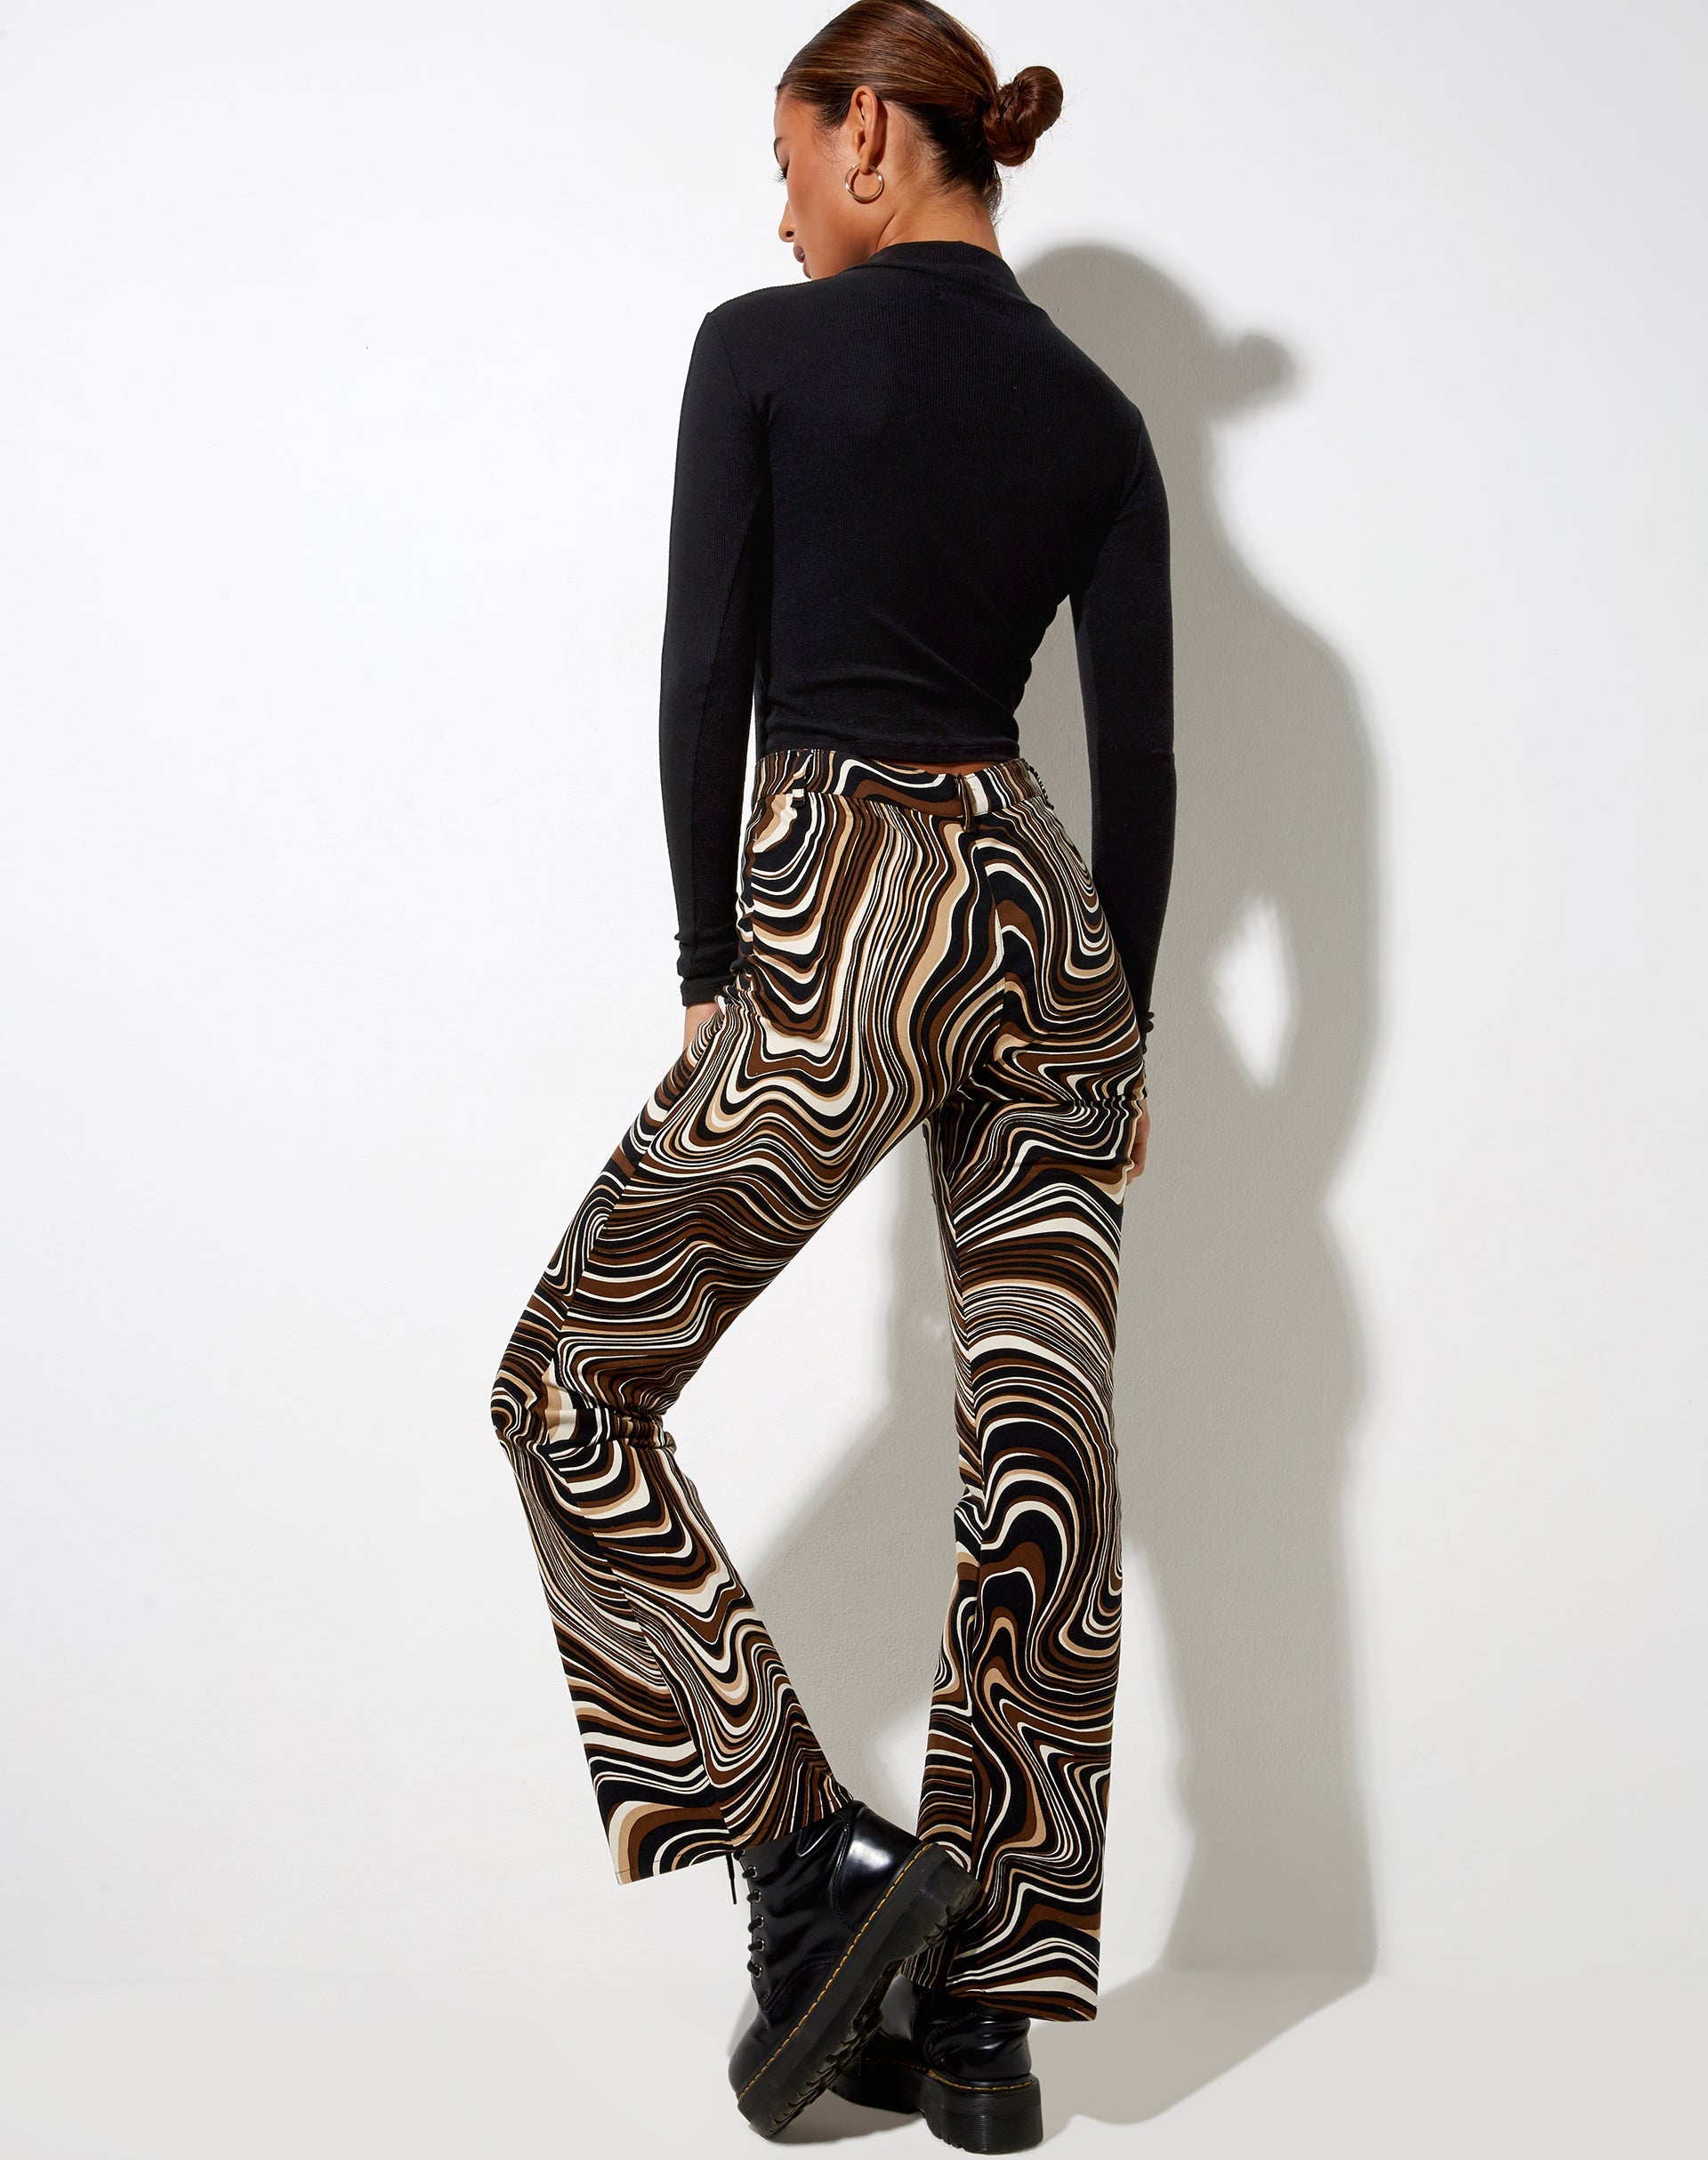 Zoven Flare Trouser in 70's Ripple